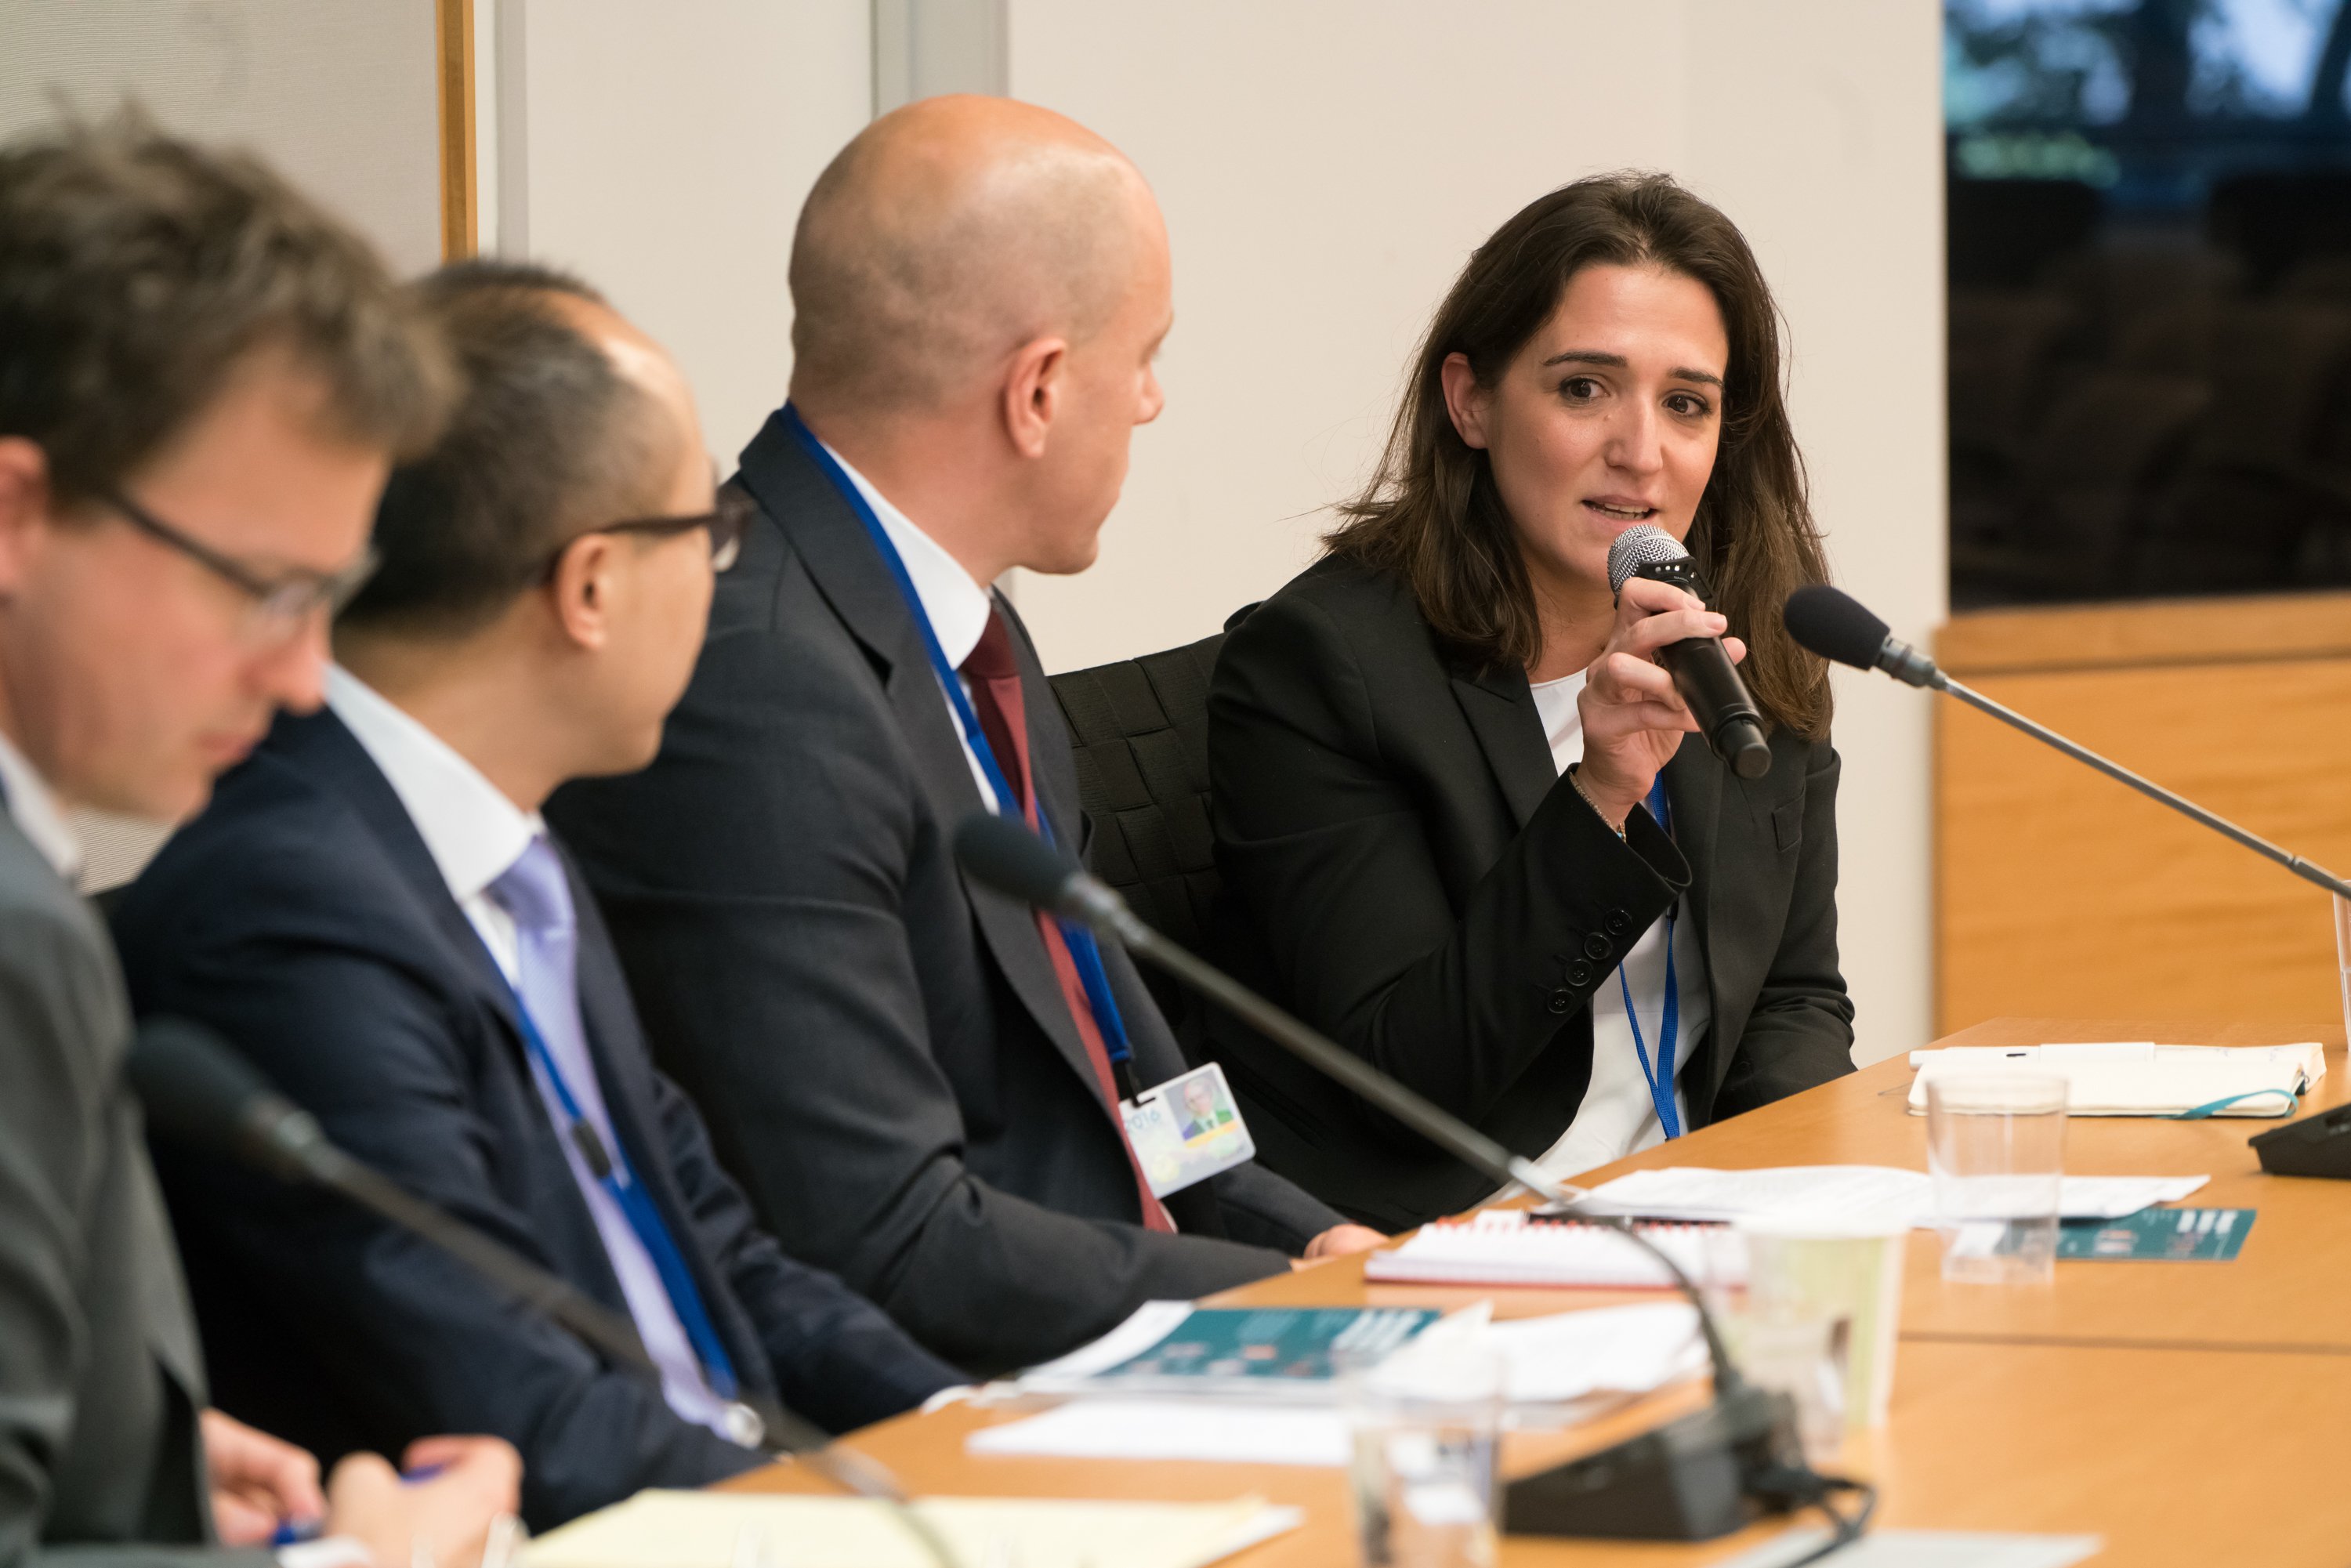 Senior Research Fellow and Team Leader, Phyllis Papadavid, speaking at the Managing global financial risks in uncertain times event